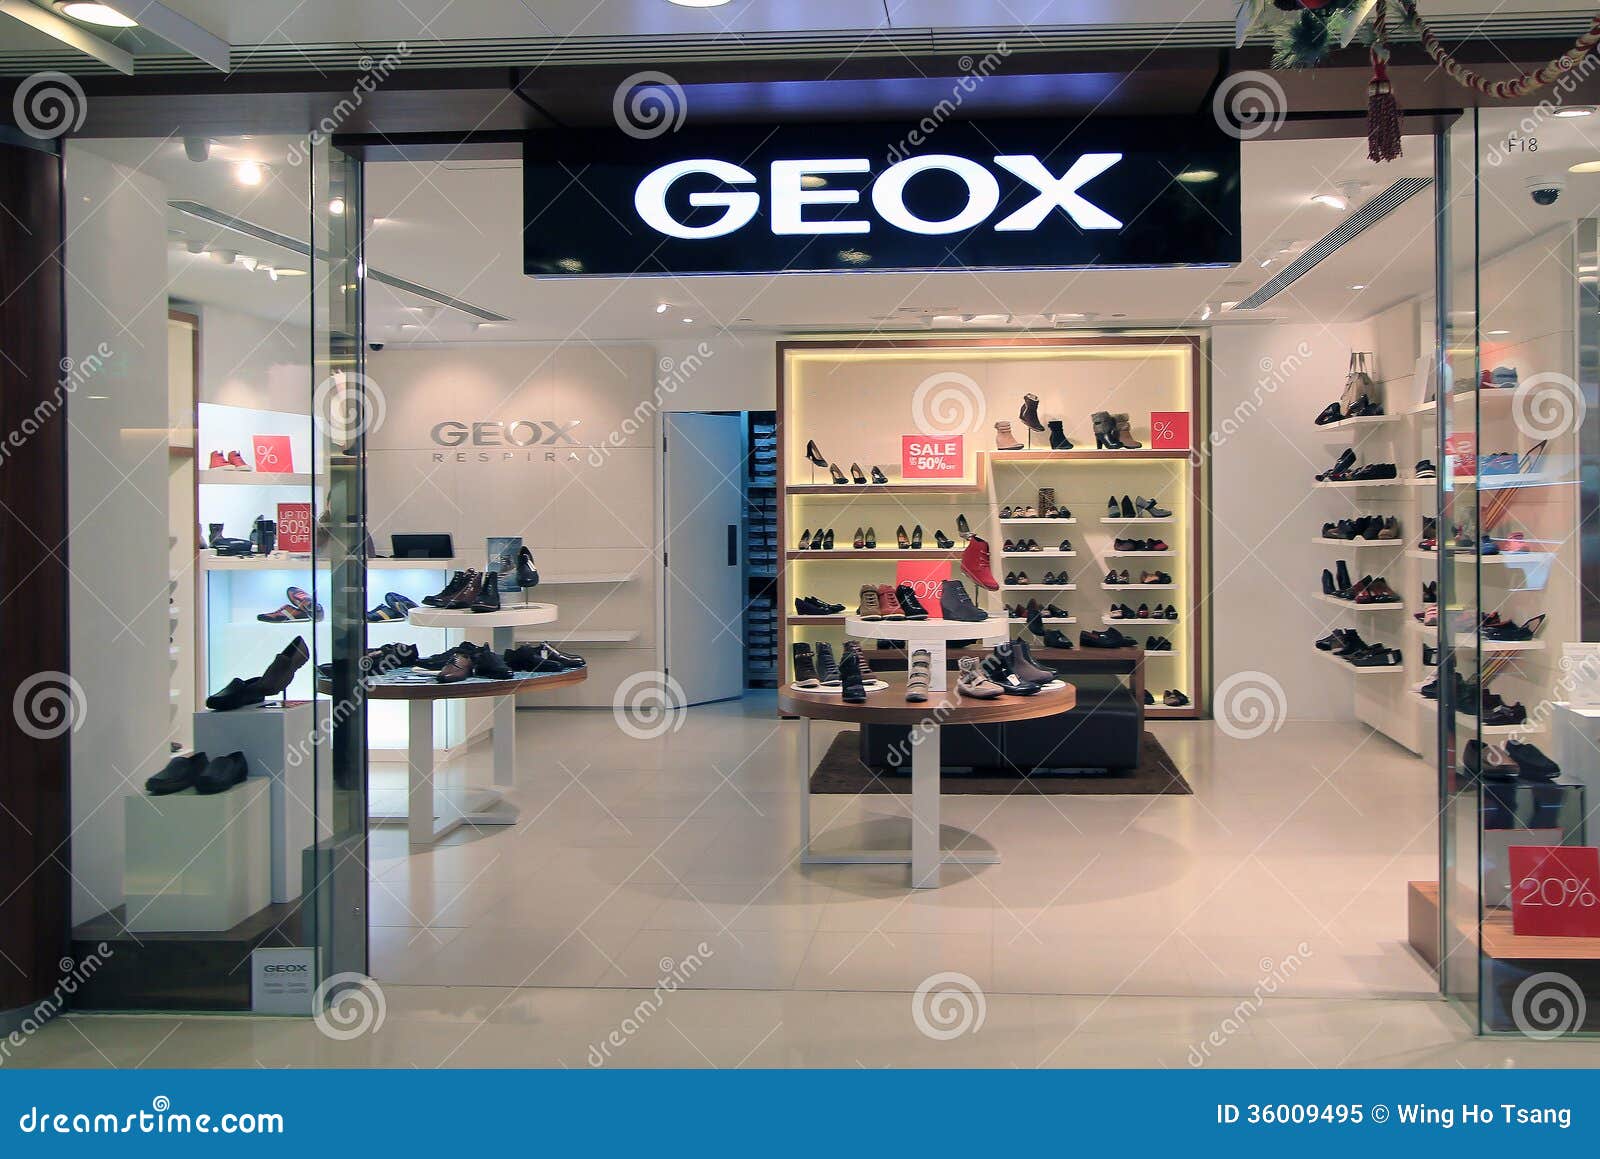 GEOX shop in Hong Kong editorial image. Image - 36009495